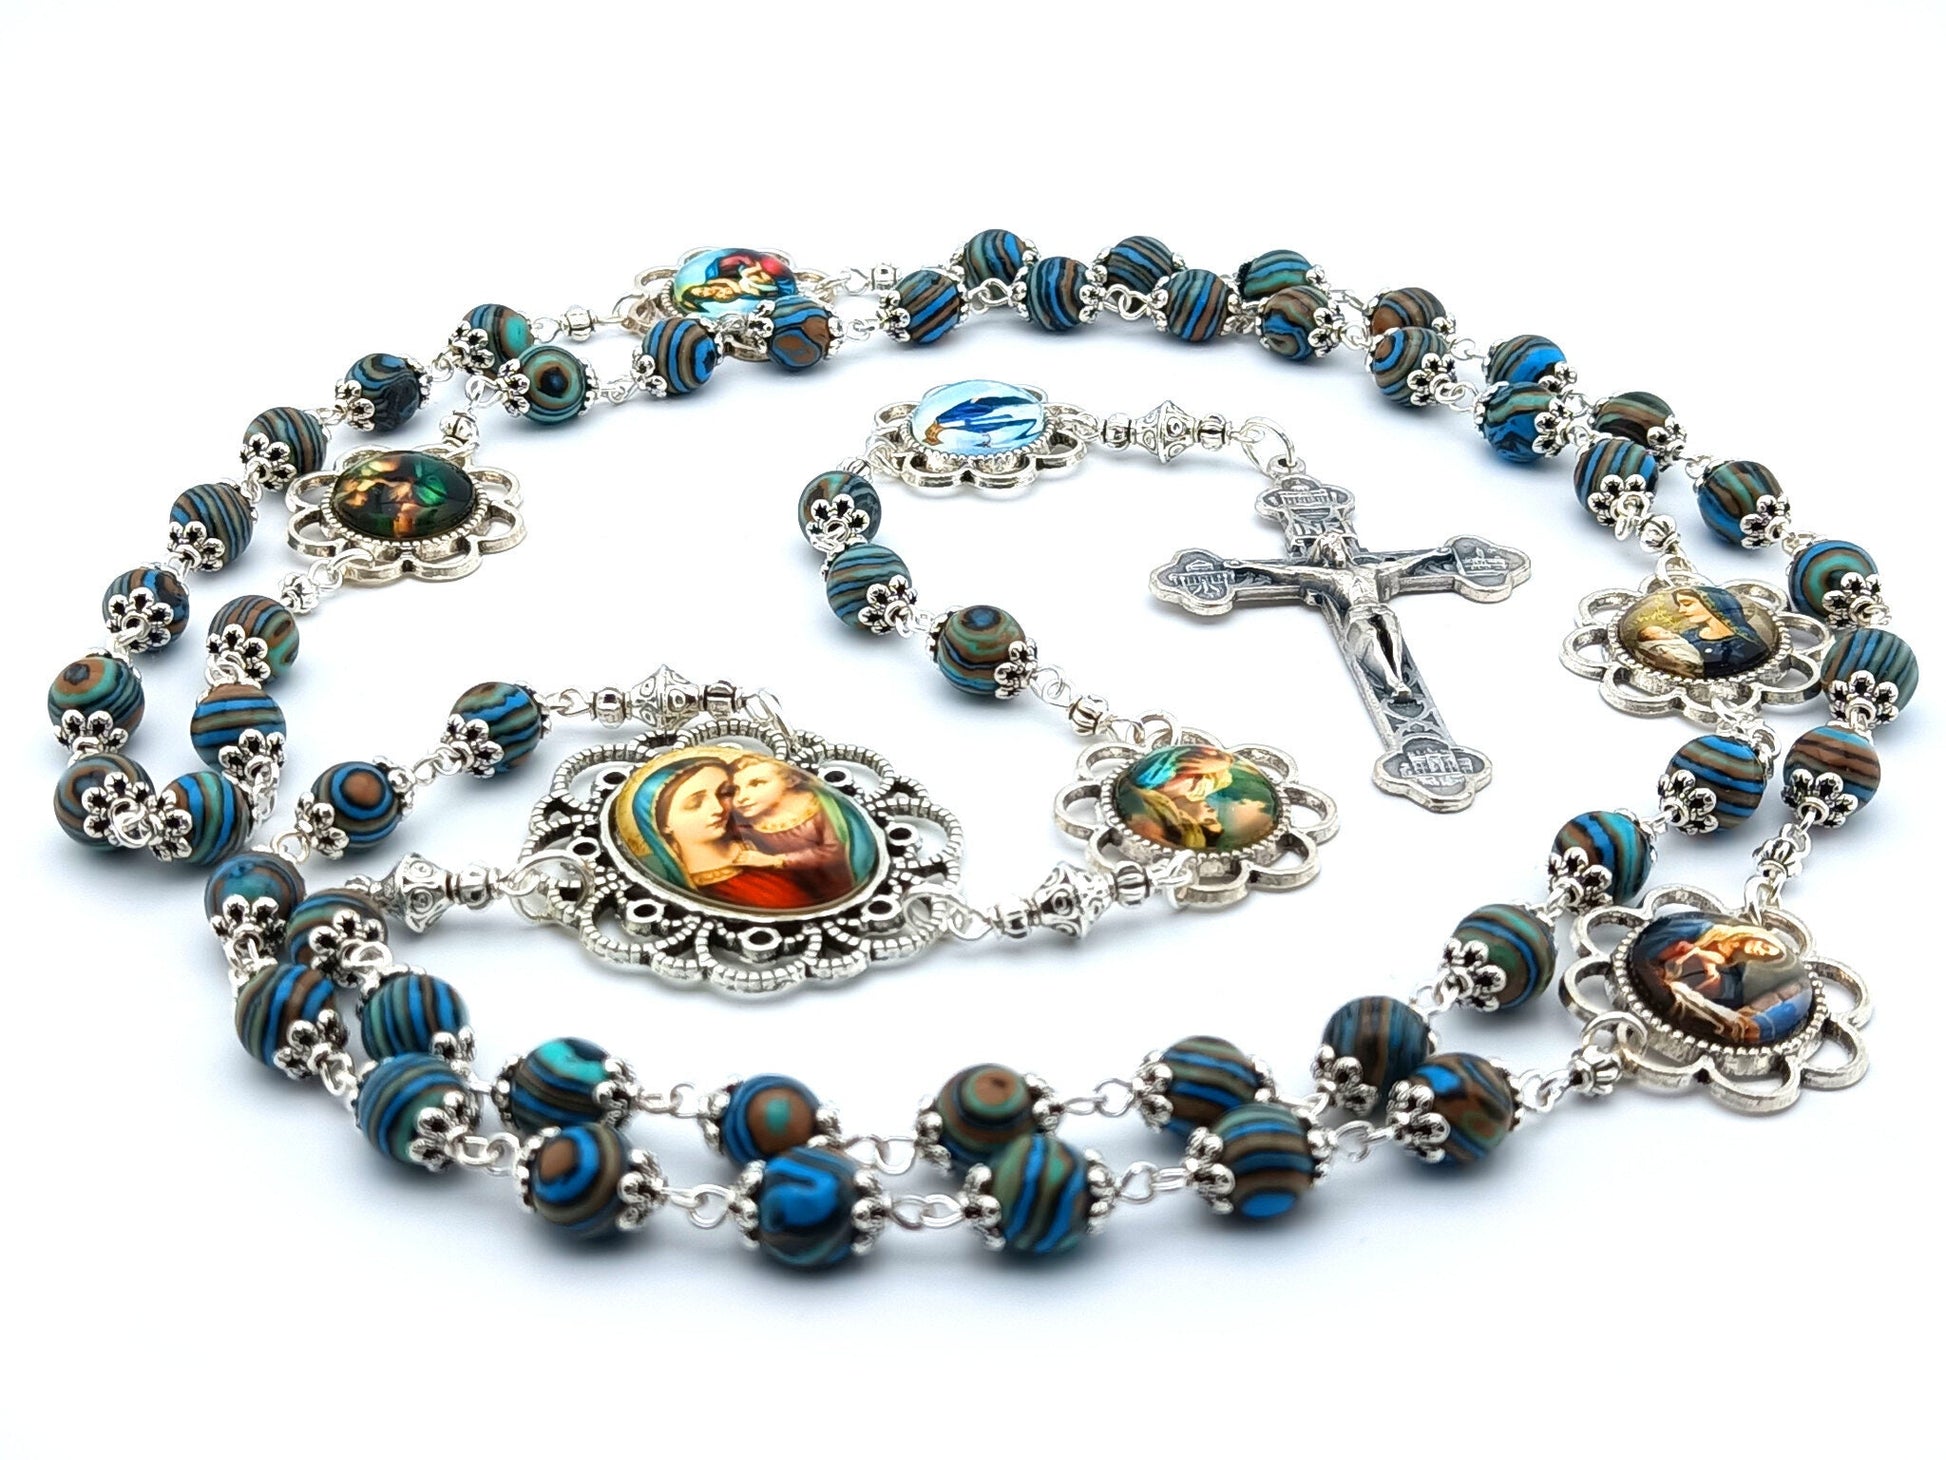 Virgin Mary unique rosary beads with malachite gemstone beads, picture pater beads and silver four basilicas crucifix and picture centre medal.